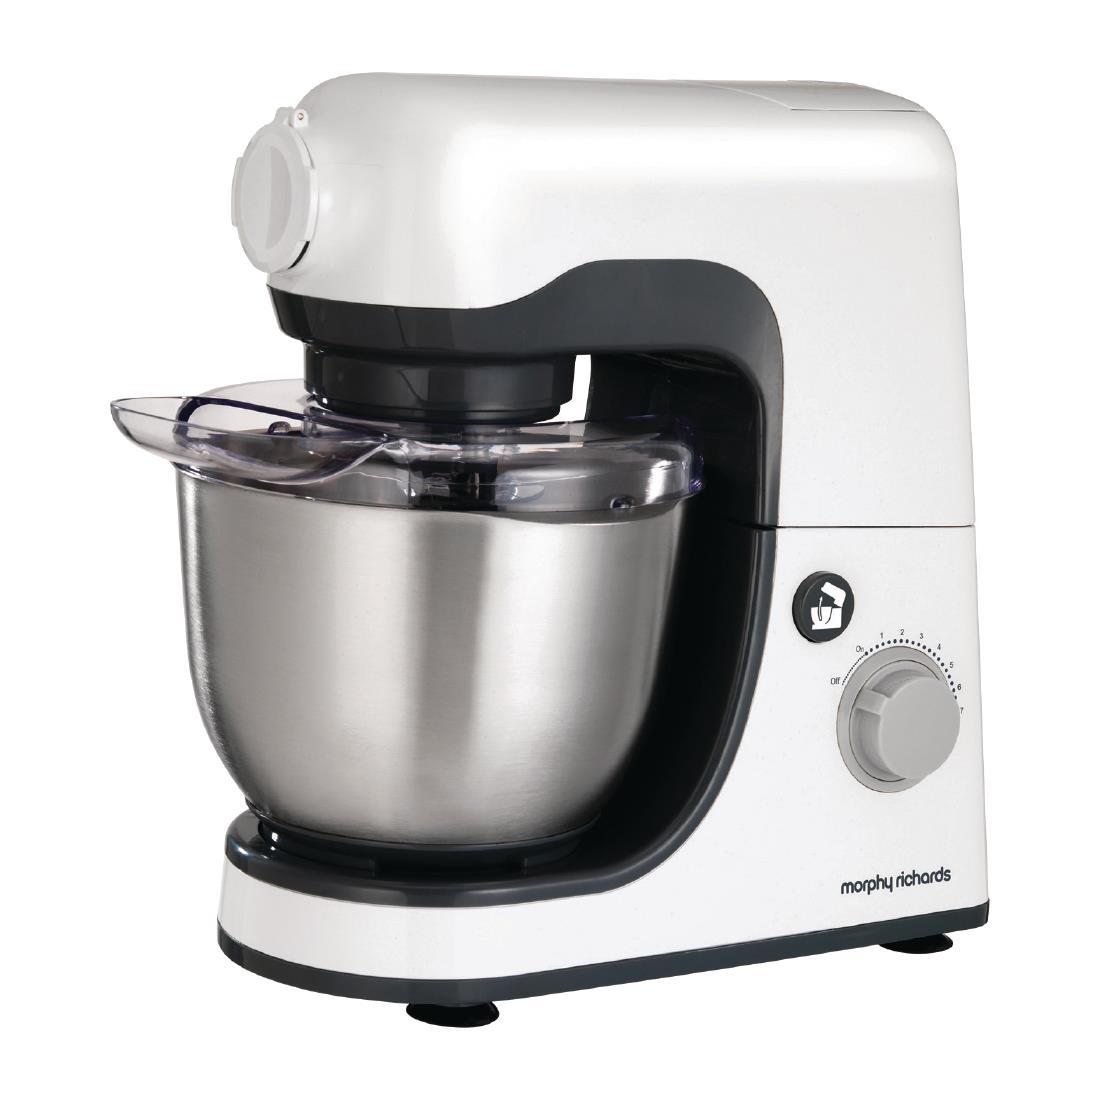 Morphy Richards Stand Mixer 400023 - FP906  - 1